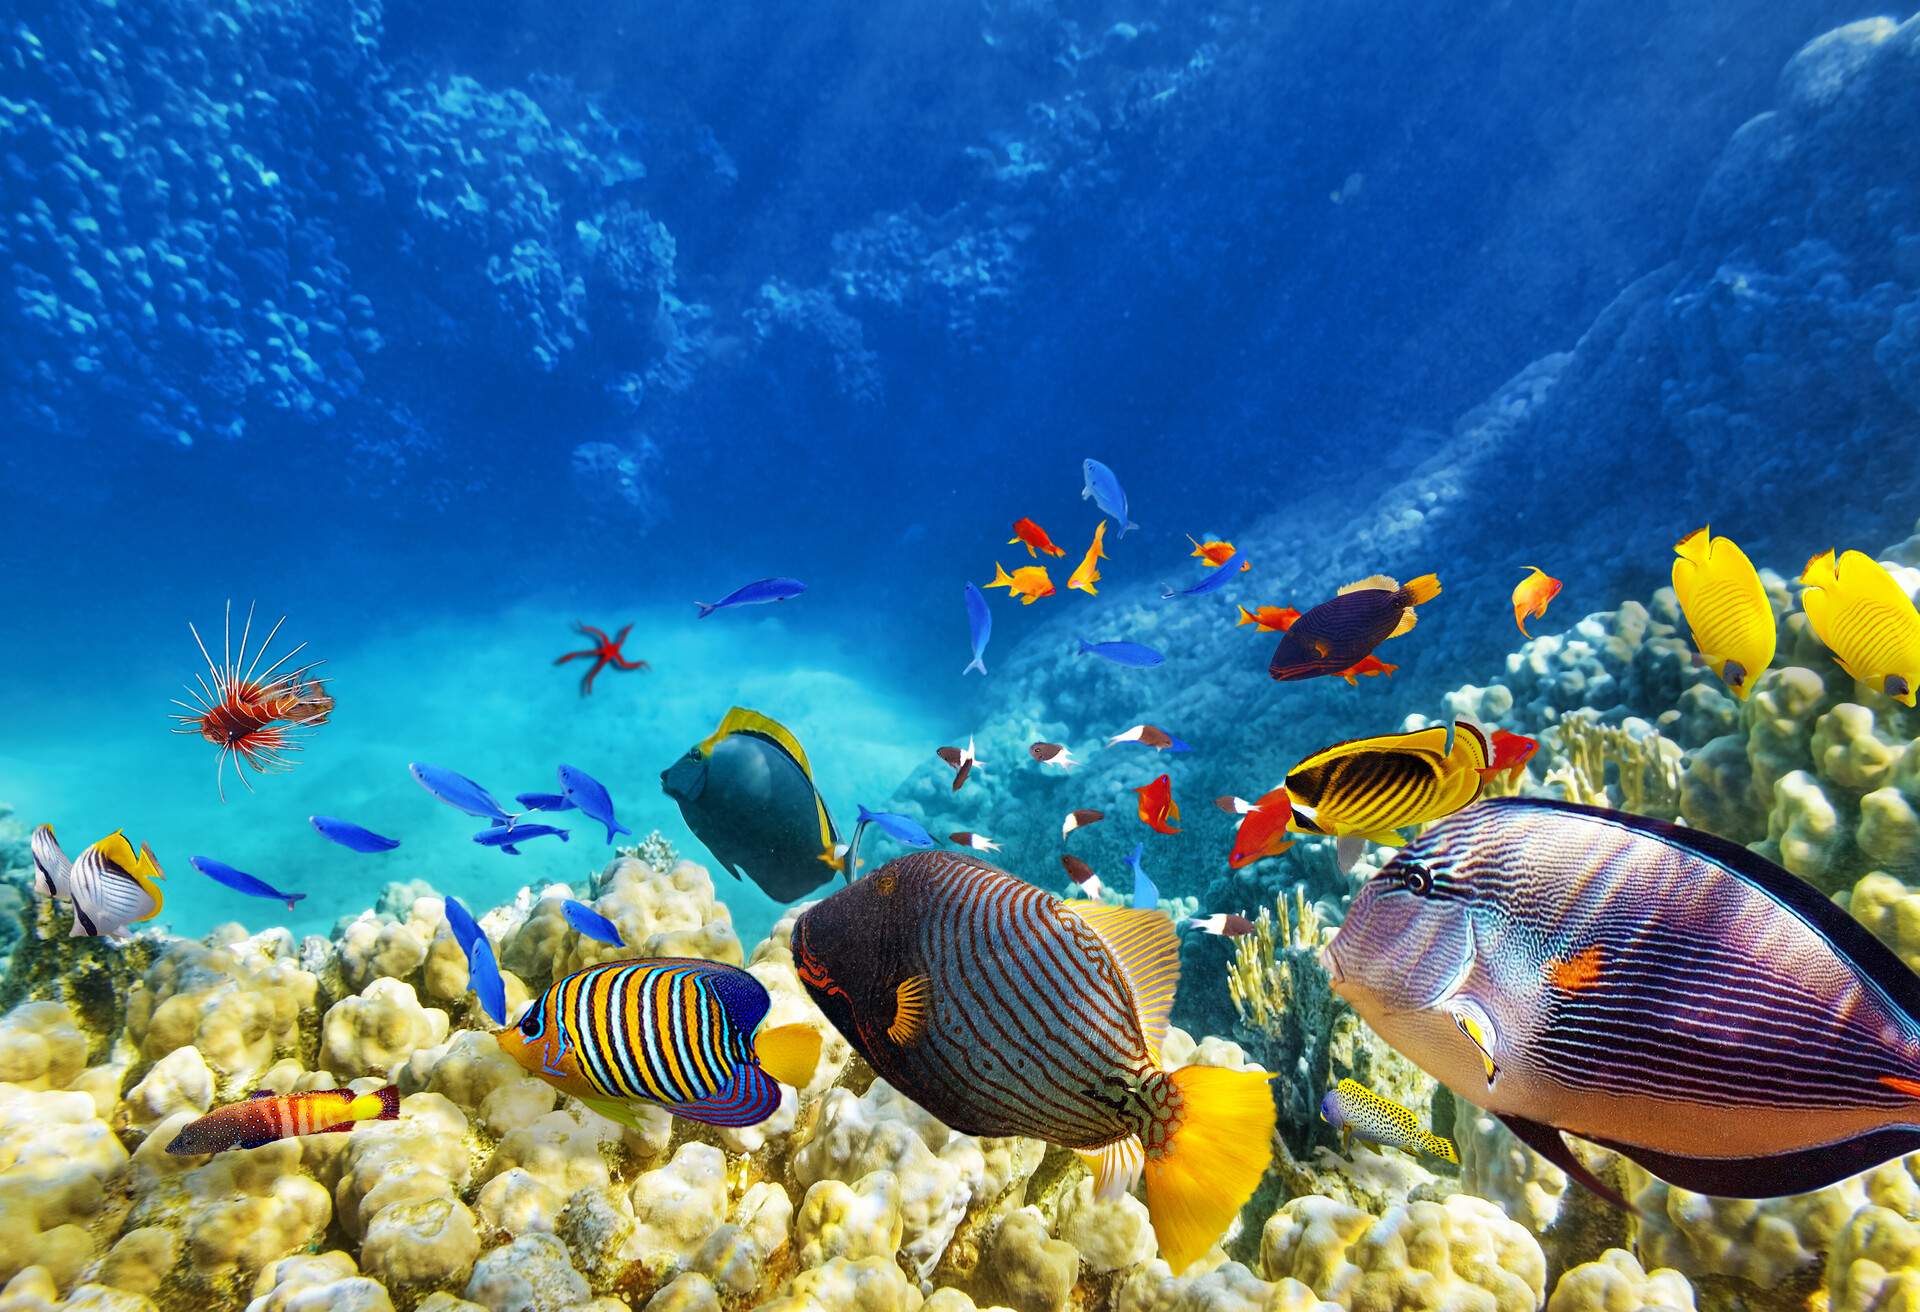 A school of colourful fish swimming above a colony of corals underwater.